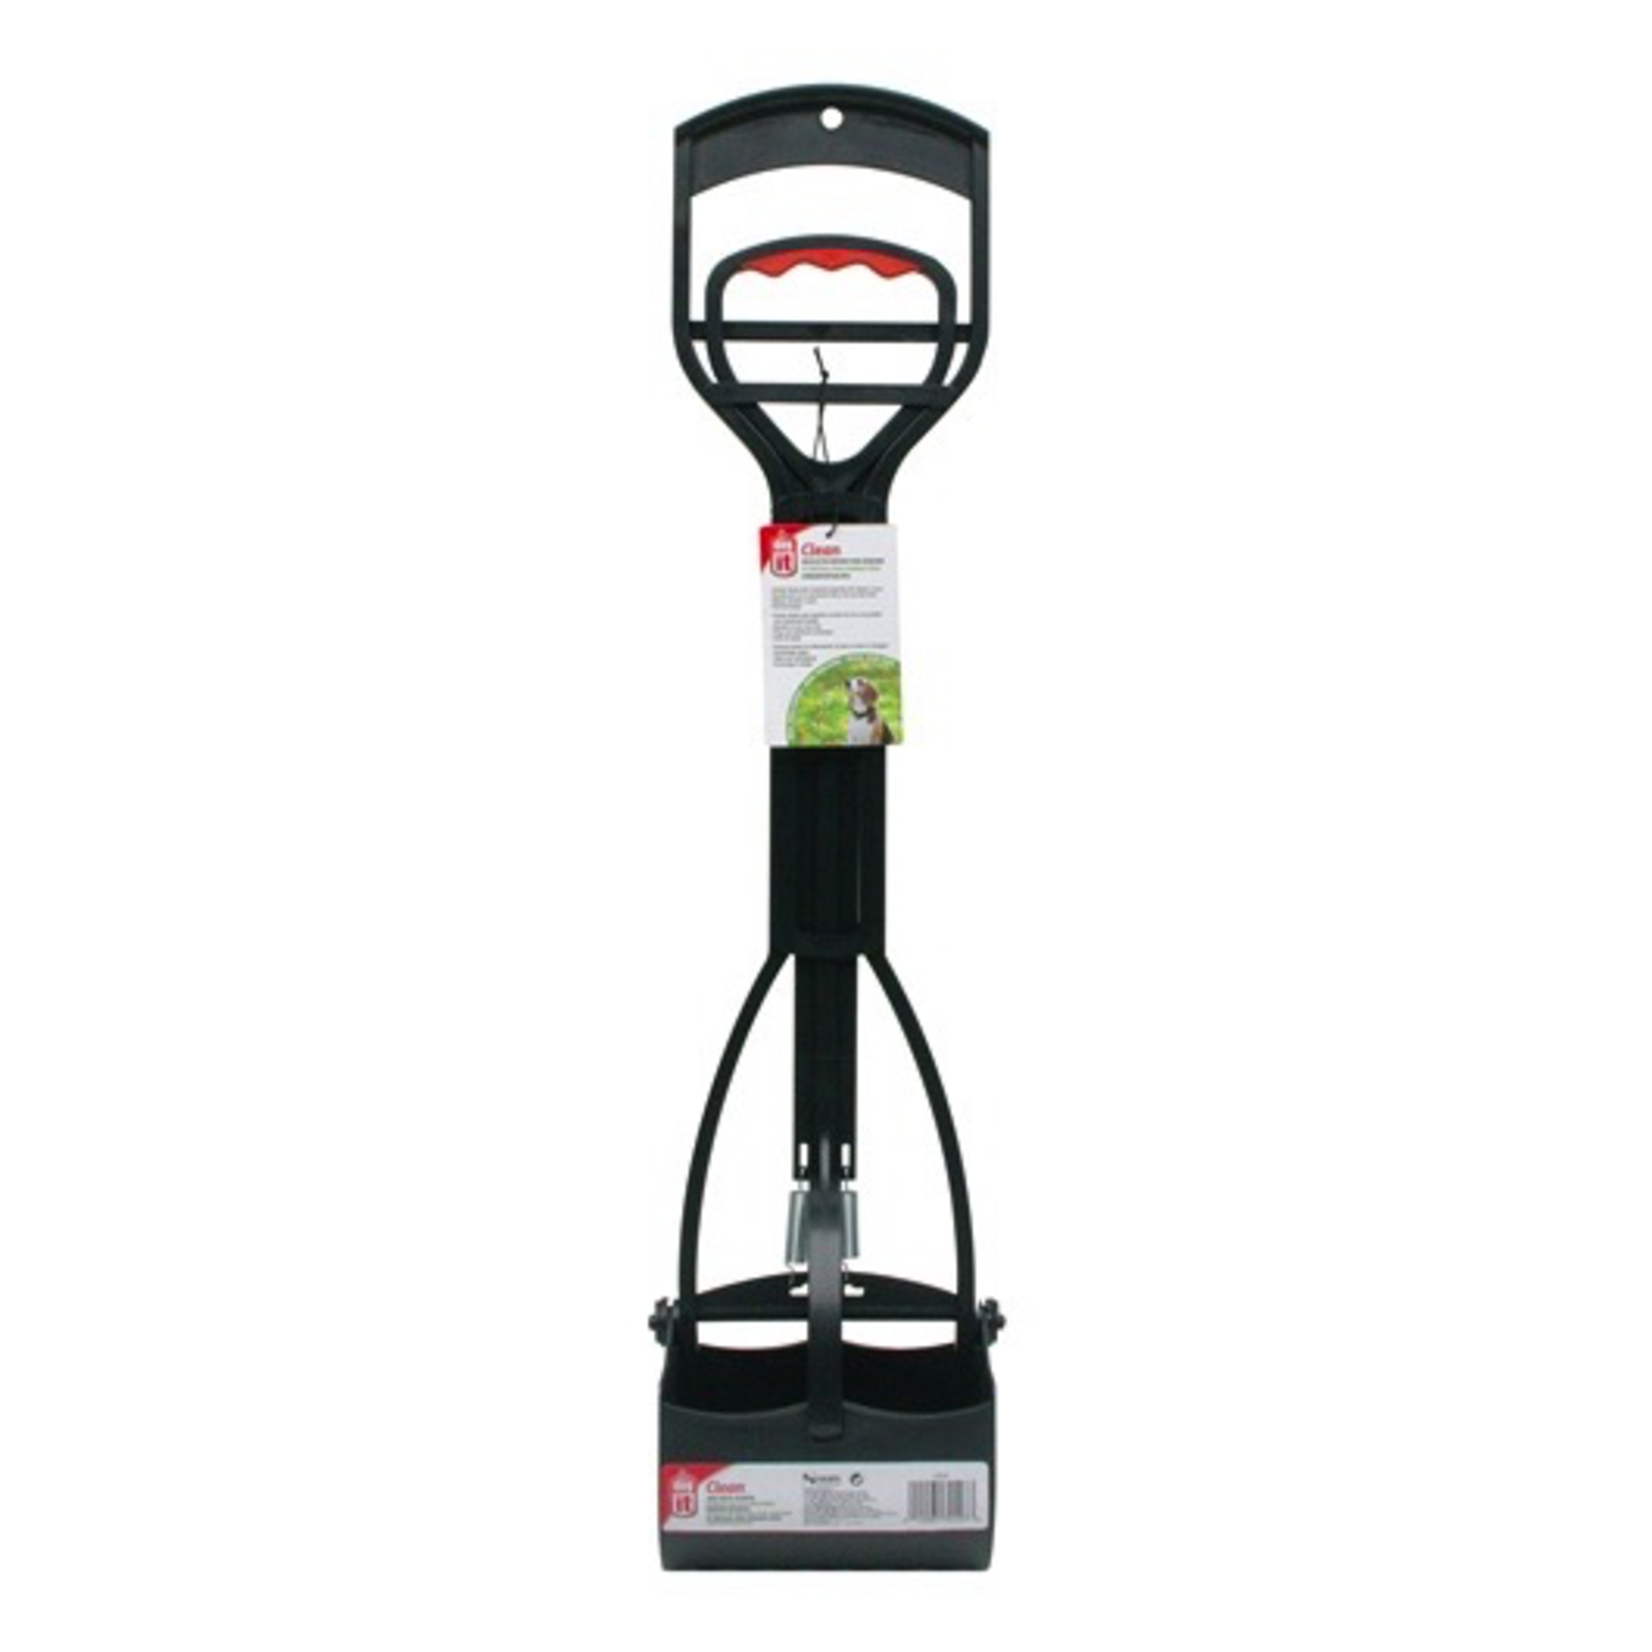 DOG IT Dogit Clean Jawz Waste Scooper for Grass & Gravel - 64 cm (25.5 in)